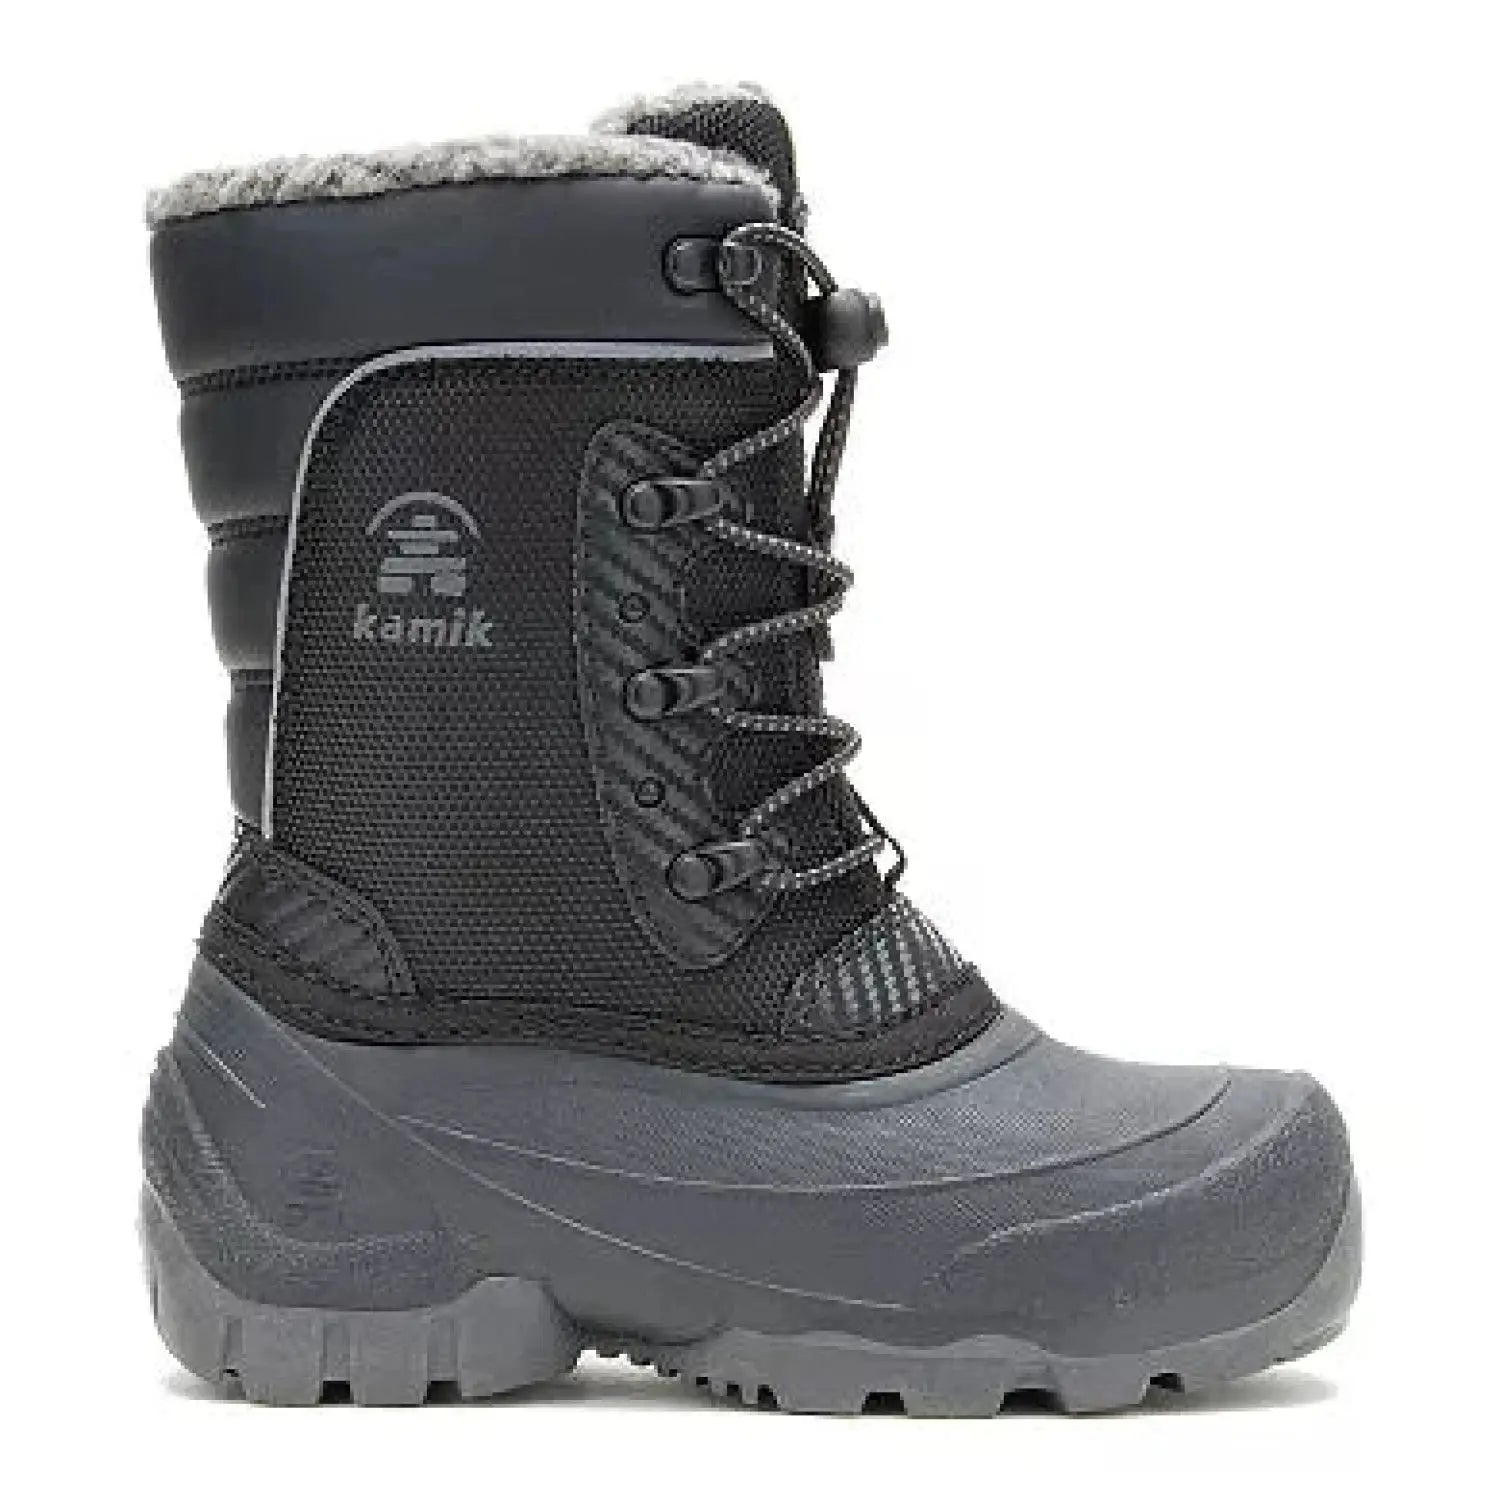 Kamik Luke 3 snow boot with bungee laces. Shown in Black, Side view.